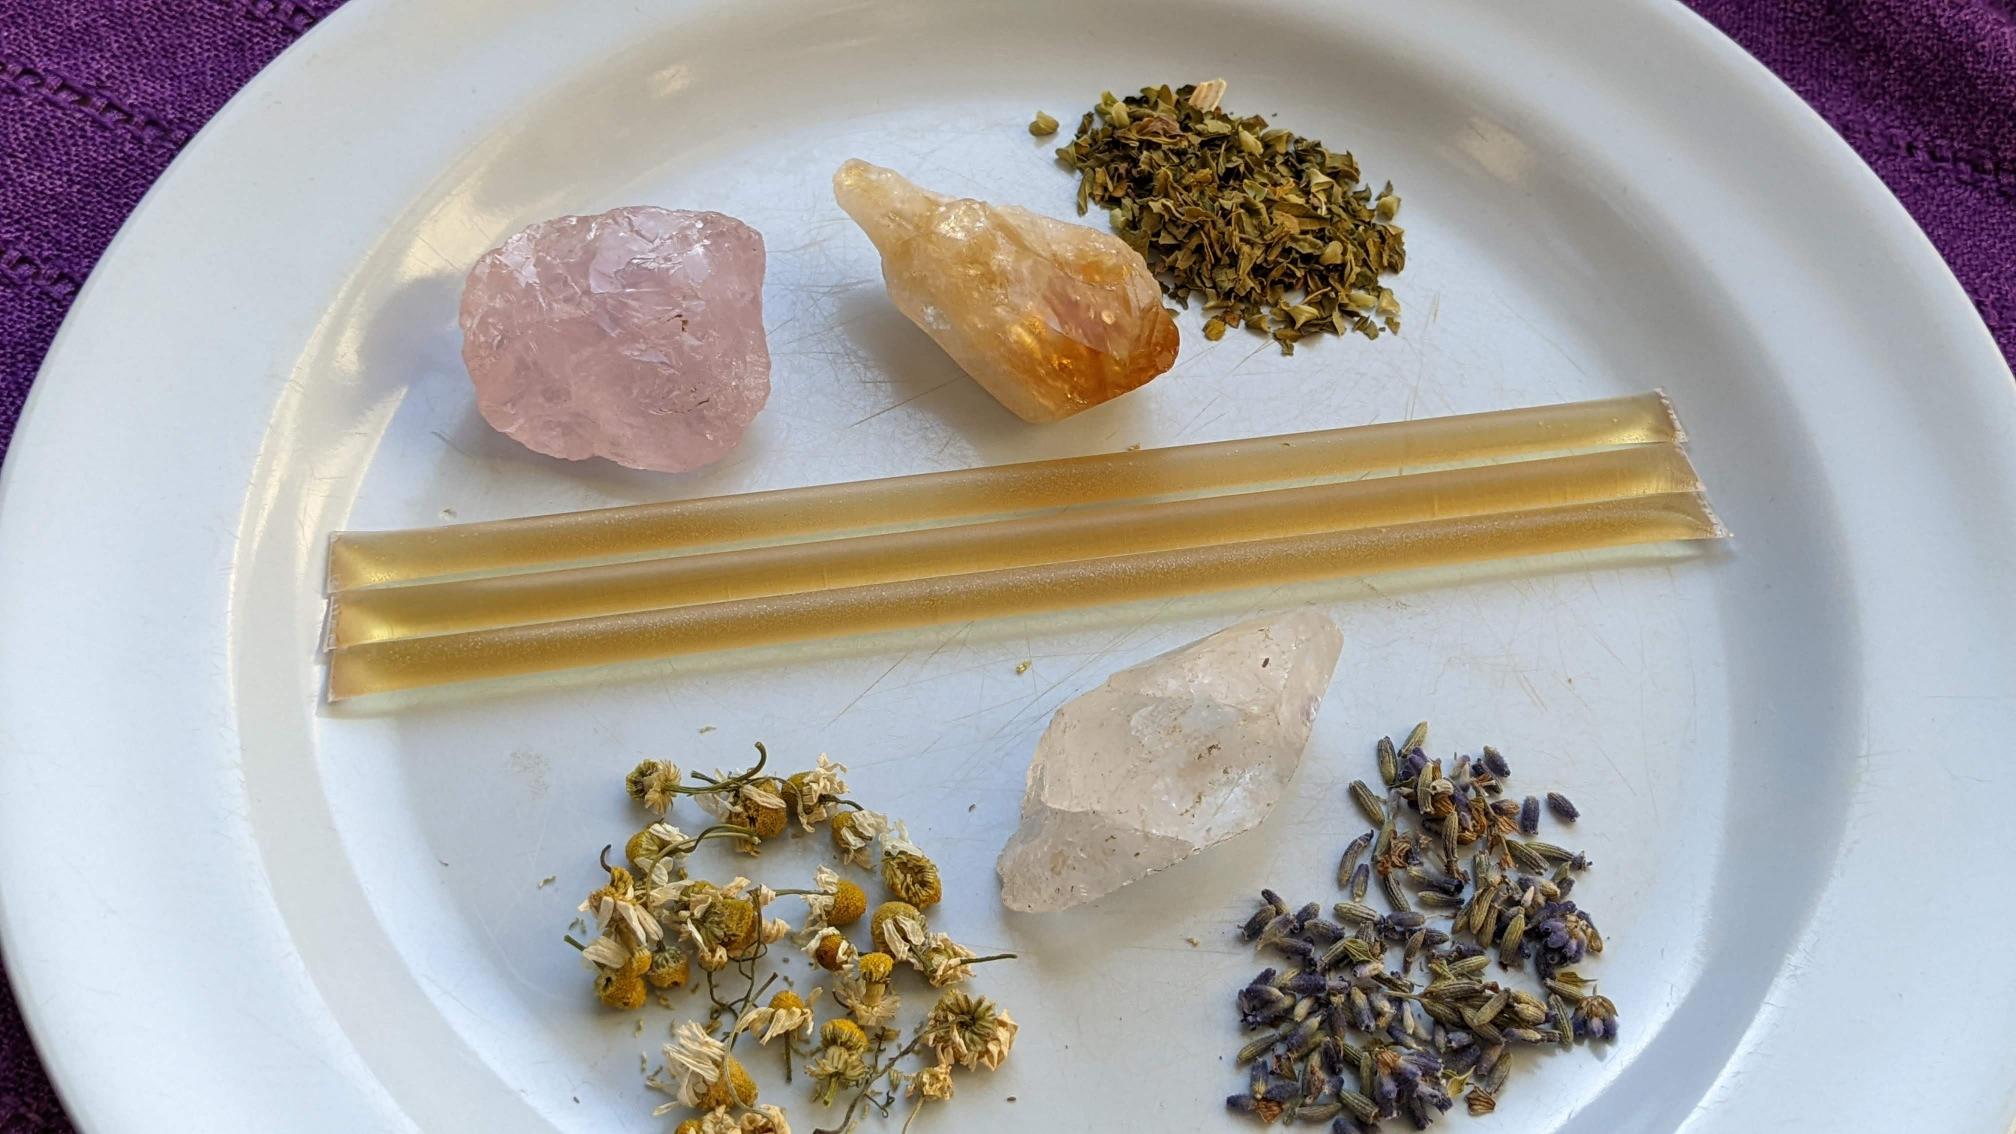 A rose quartz and citrine sit on a plate next to three honey straws. A small pile of dried chamomile, dried lavender, and dried skullcap adorn the plate in natural light.